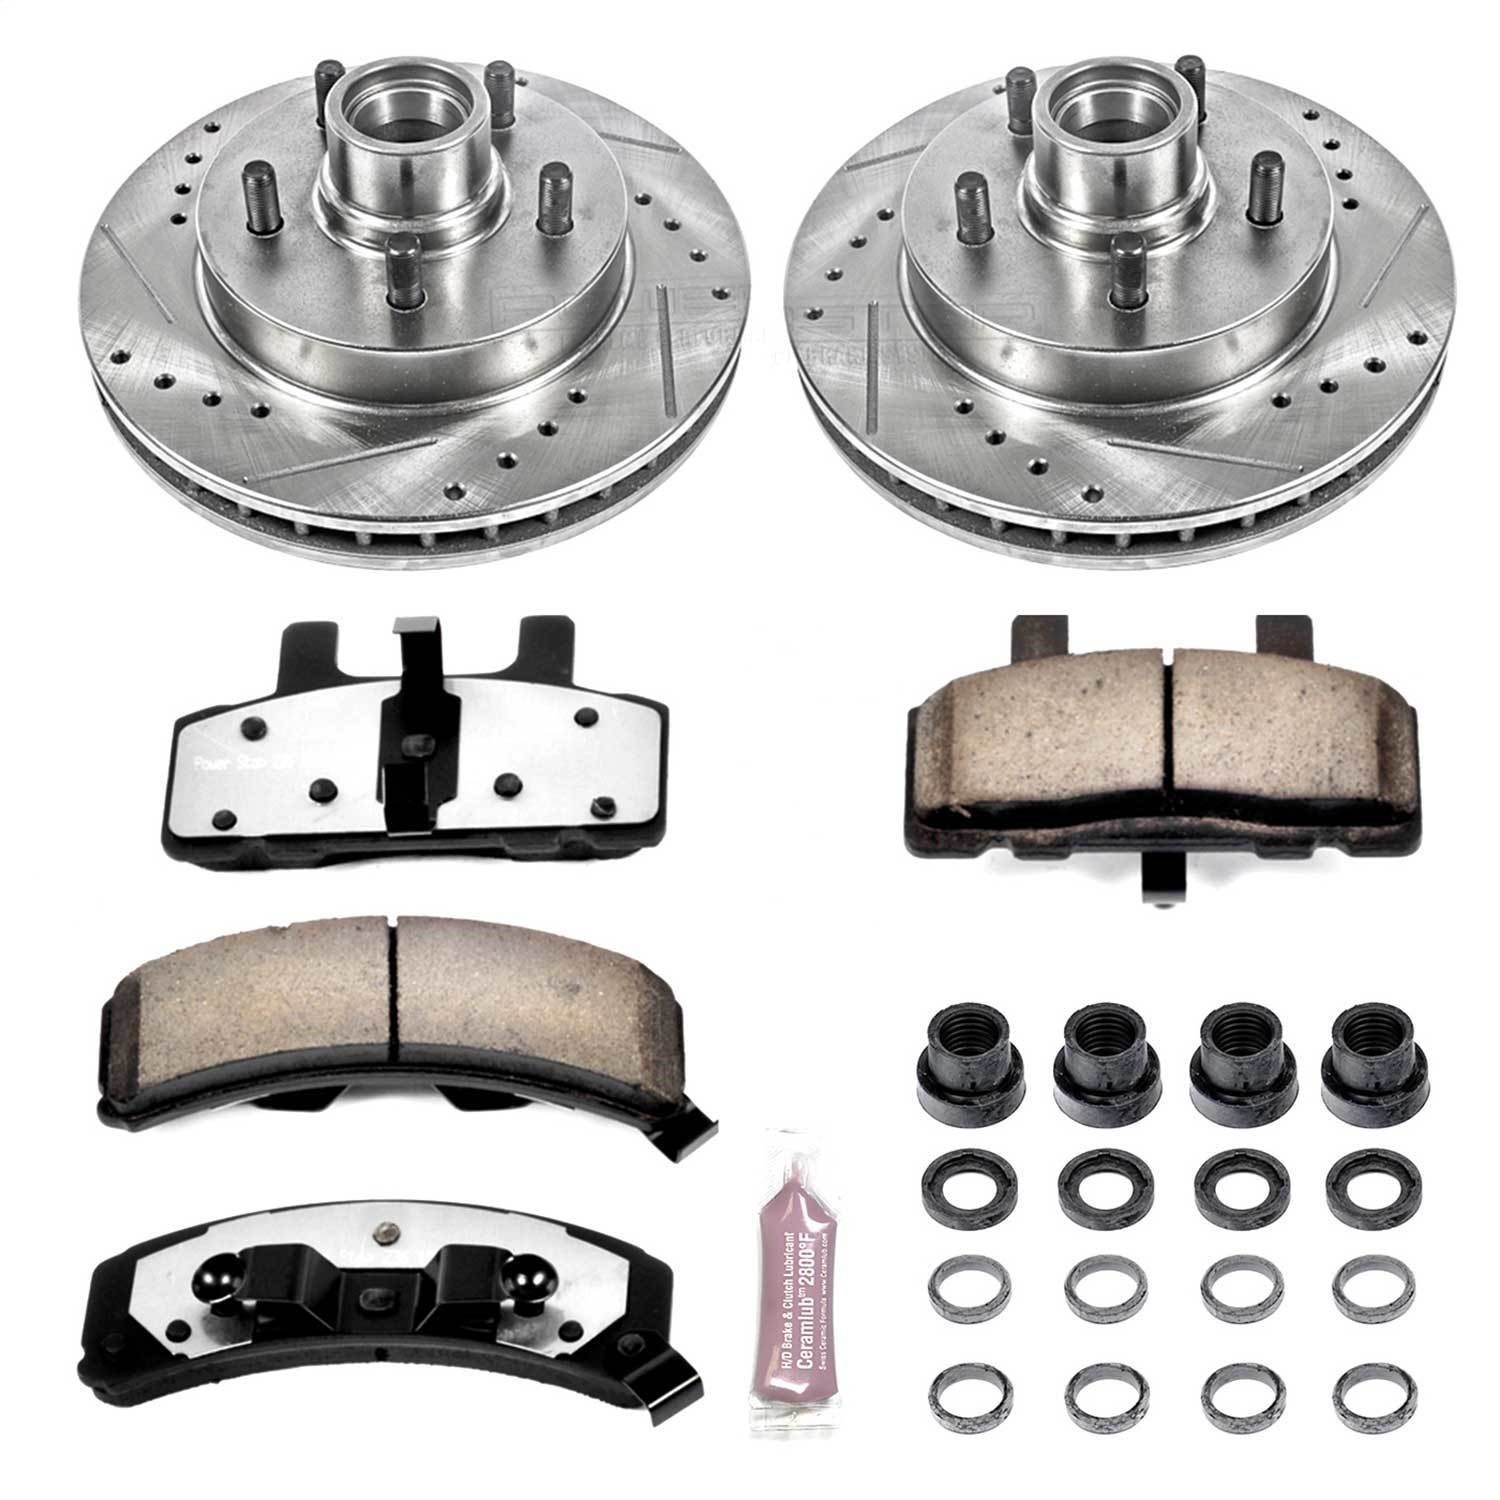 Z36 Front Brake Pads & Rotor Kit for Truck and Tow